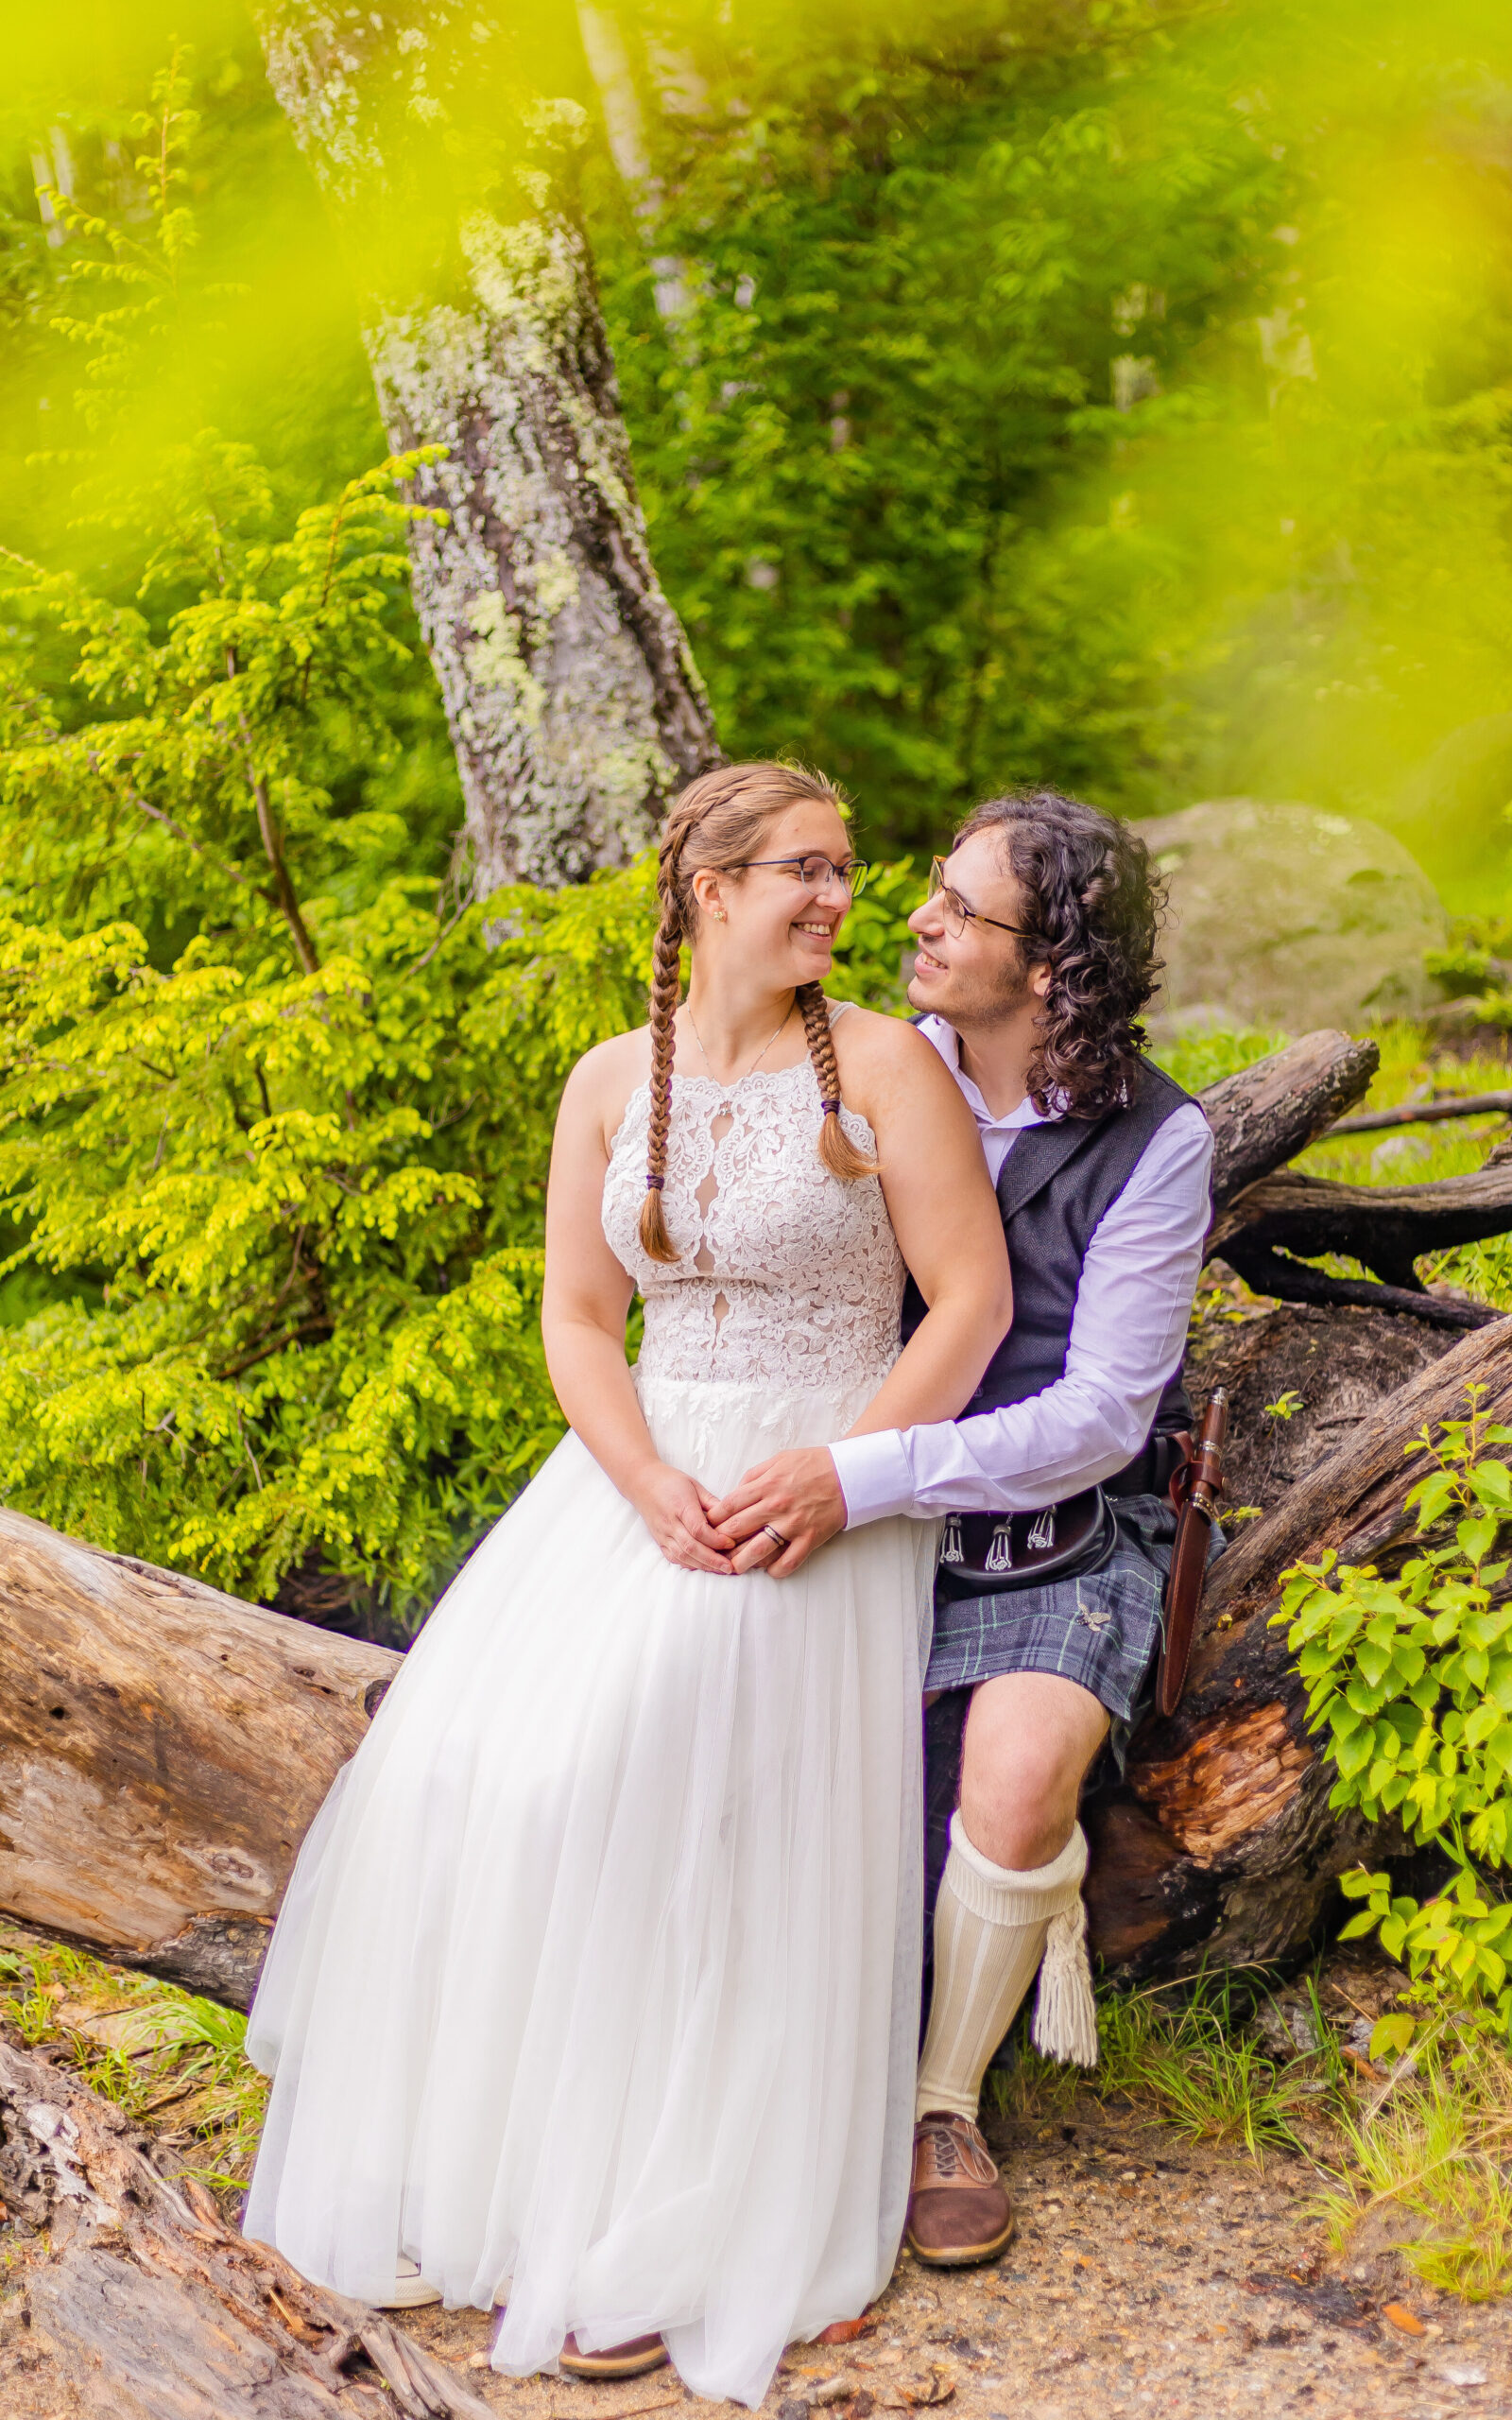 The bride and groom sit together on a log staring into each other's eyes.